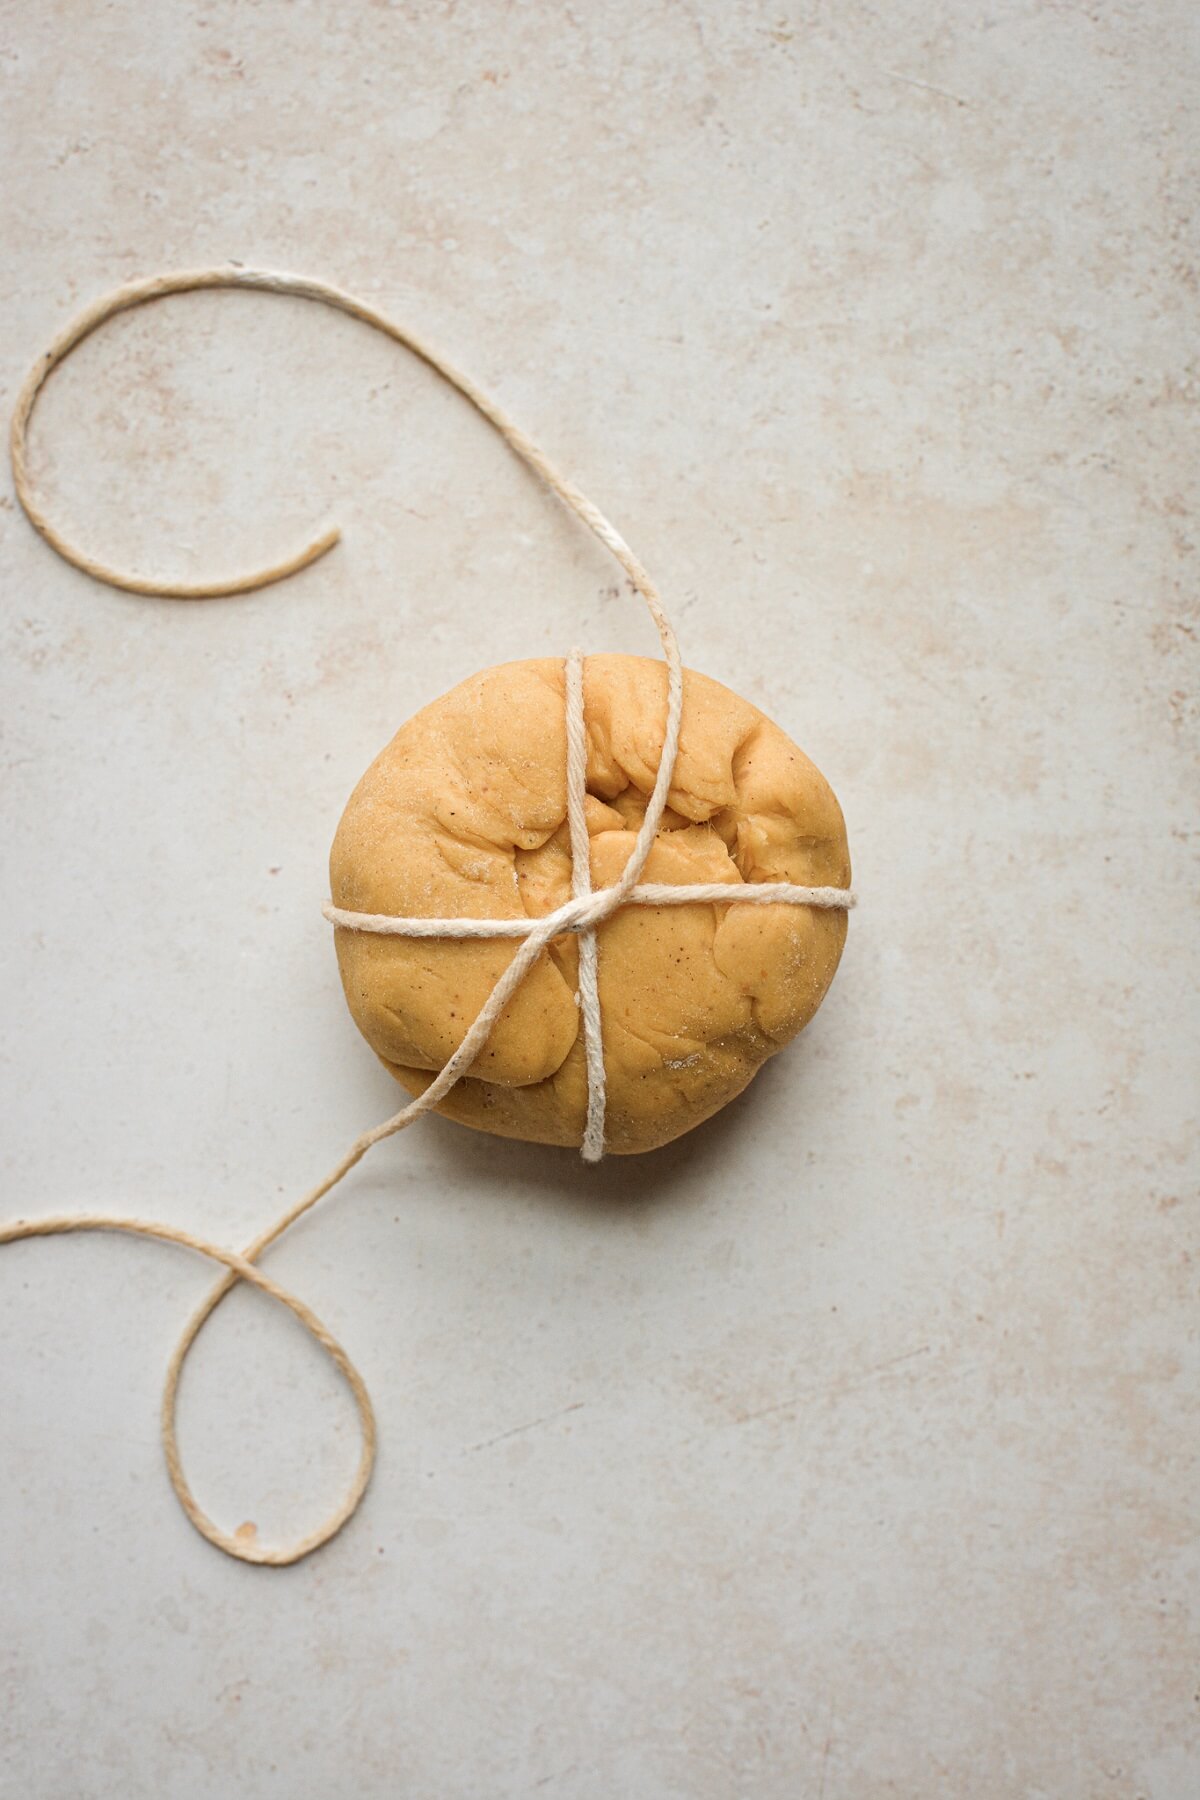 Step 3 for tying pumpkin shaped dinner rolls with twine.